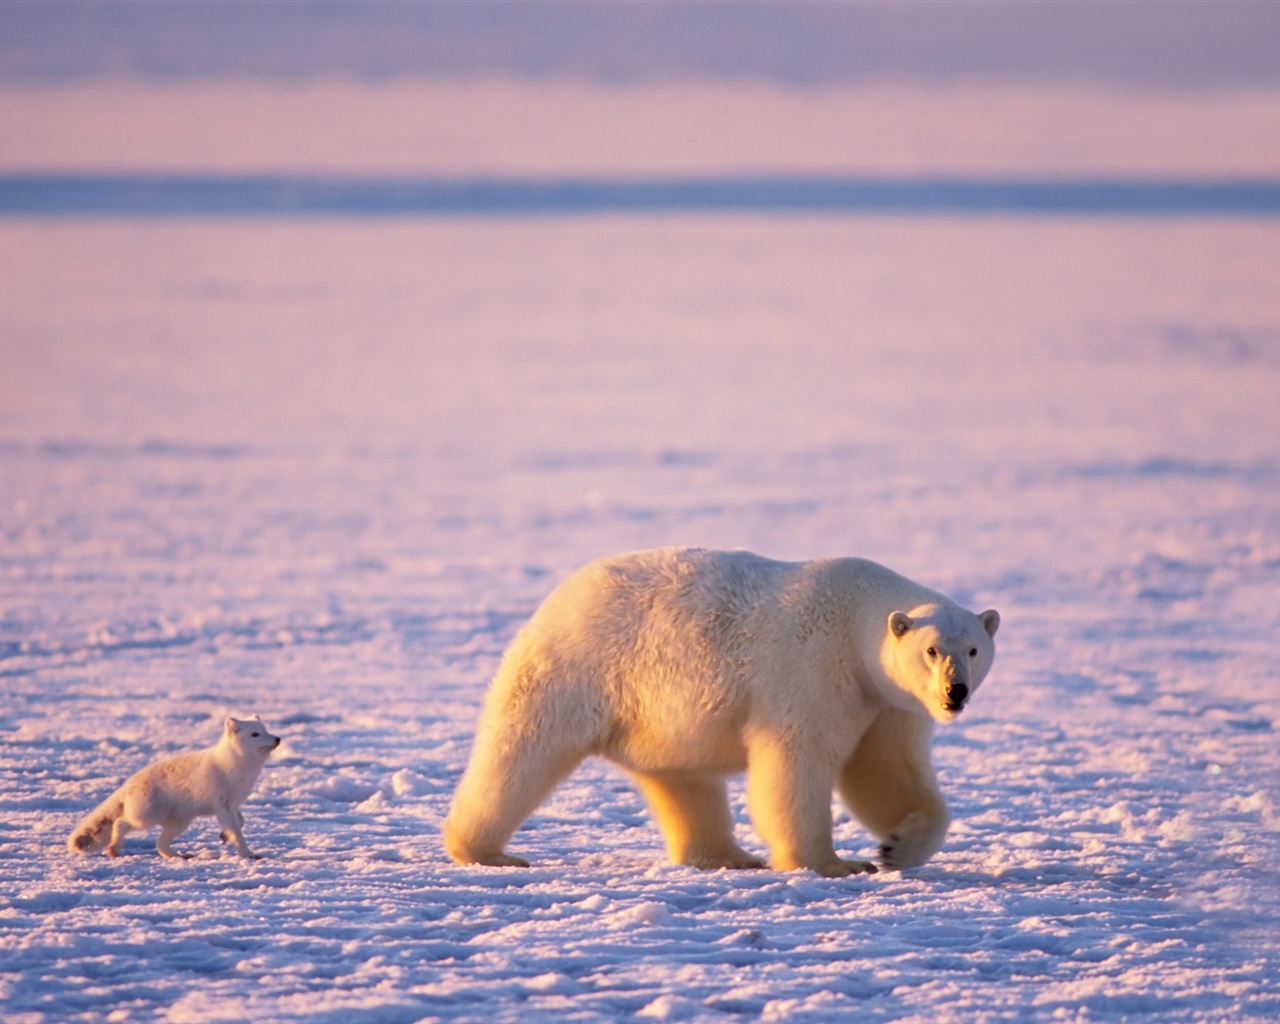 Windows 8 Wallpapers: Arctic, the nature ecological landscape, arctic animals #10 - 1280x1024